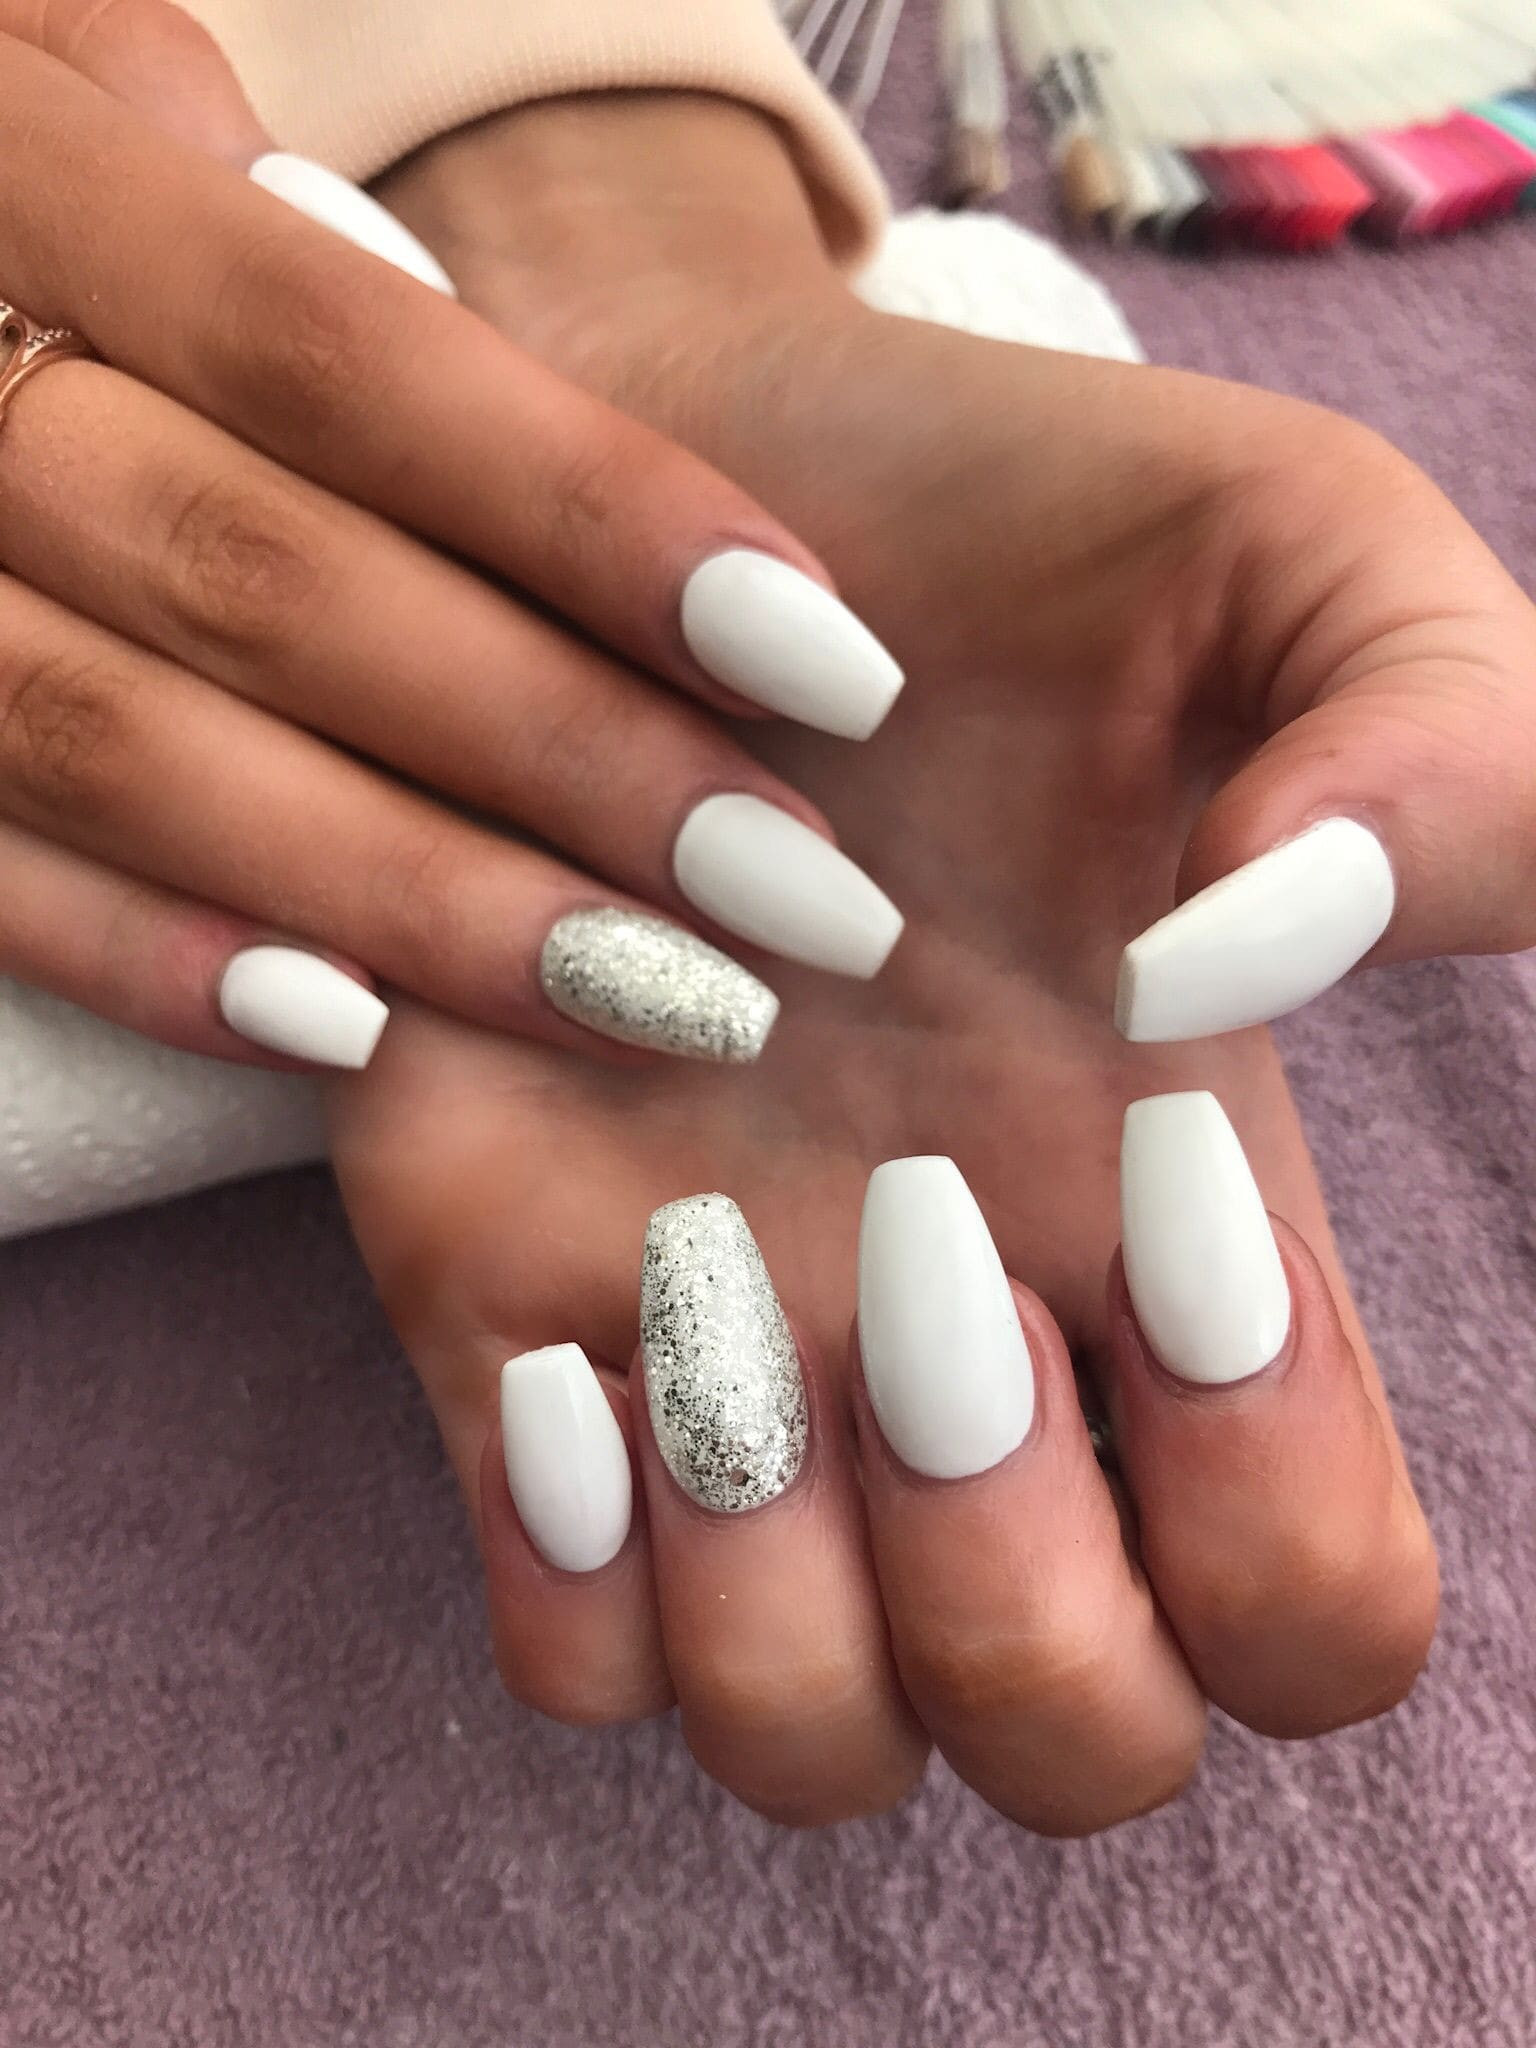 White Glitter Acrylic Nails
 6 Best New Acrylic Nail Designs 2018 ⋆ Fitnailslover